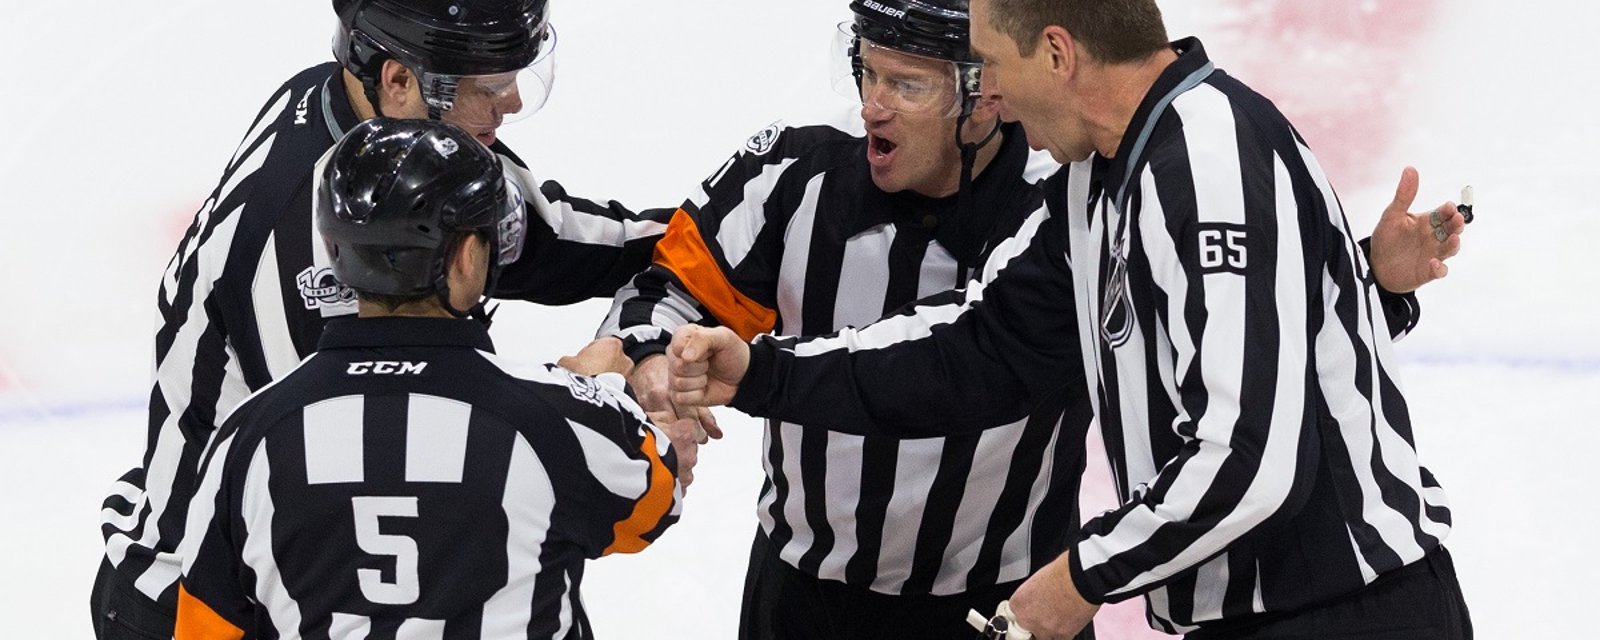 Breaking: Major controversy in Game 5 after goal review.